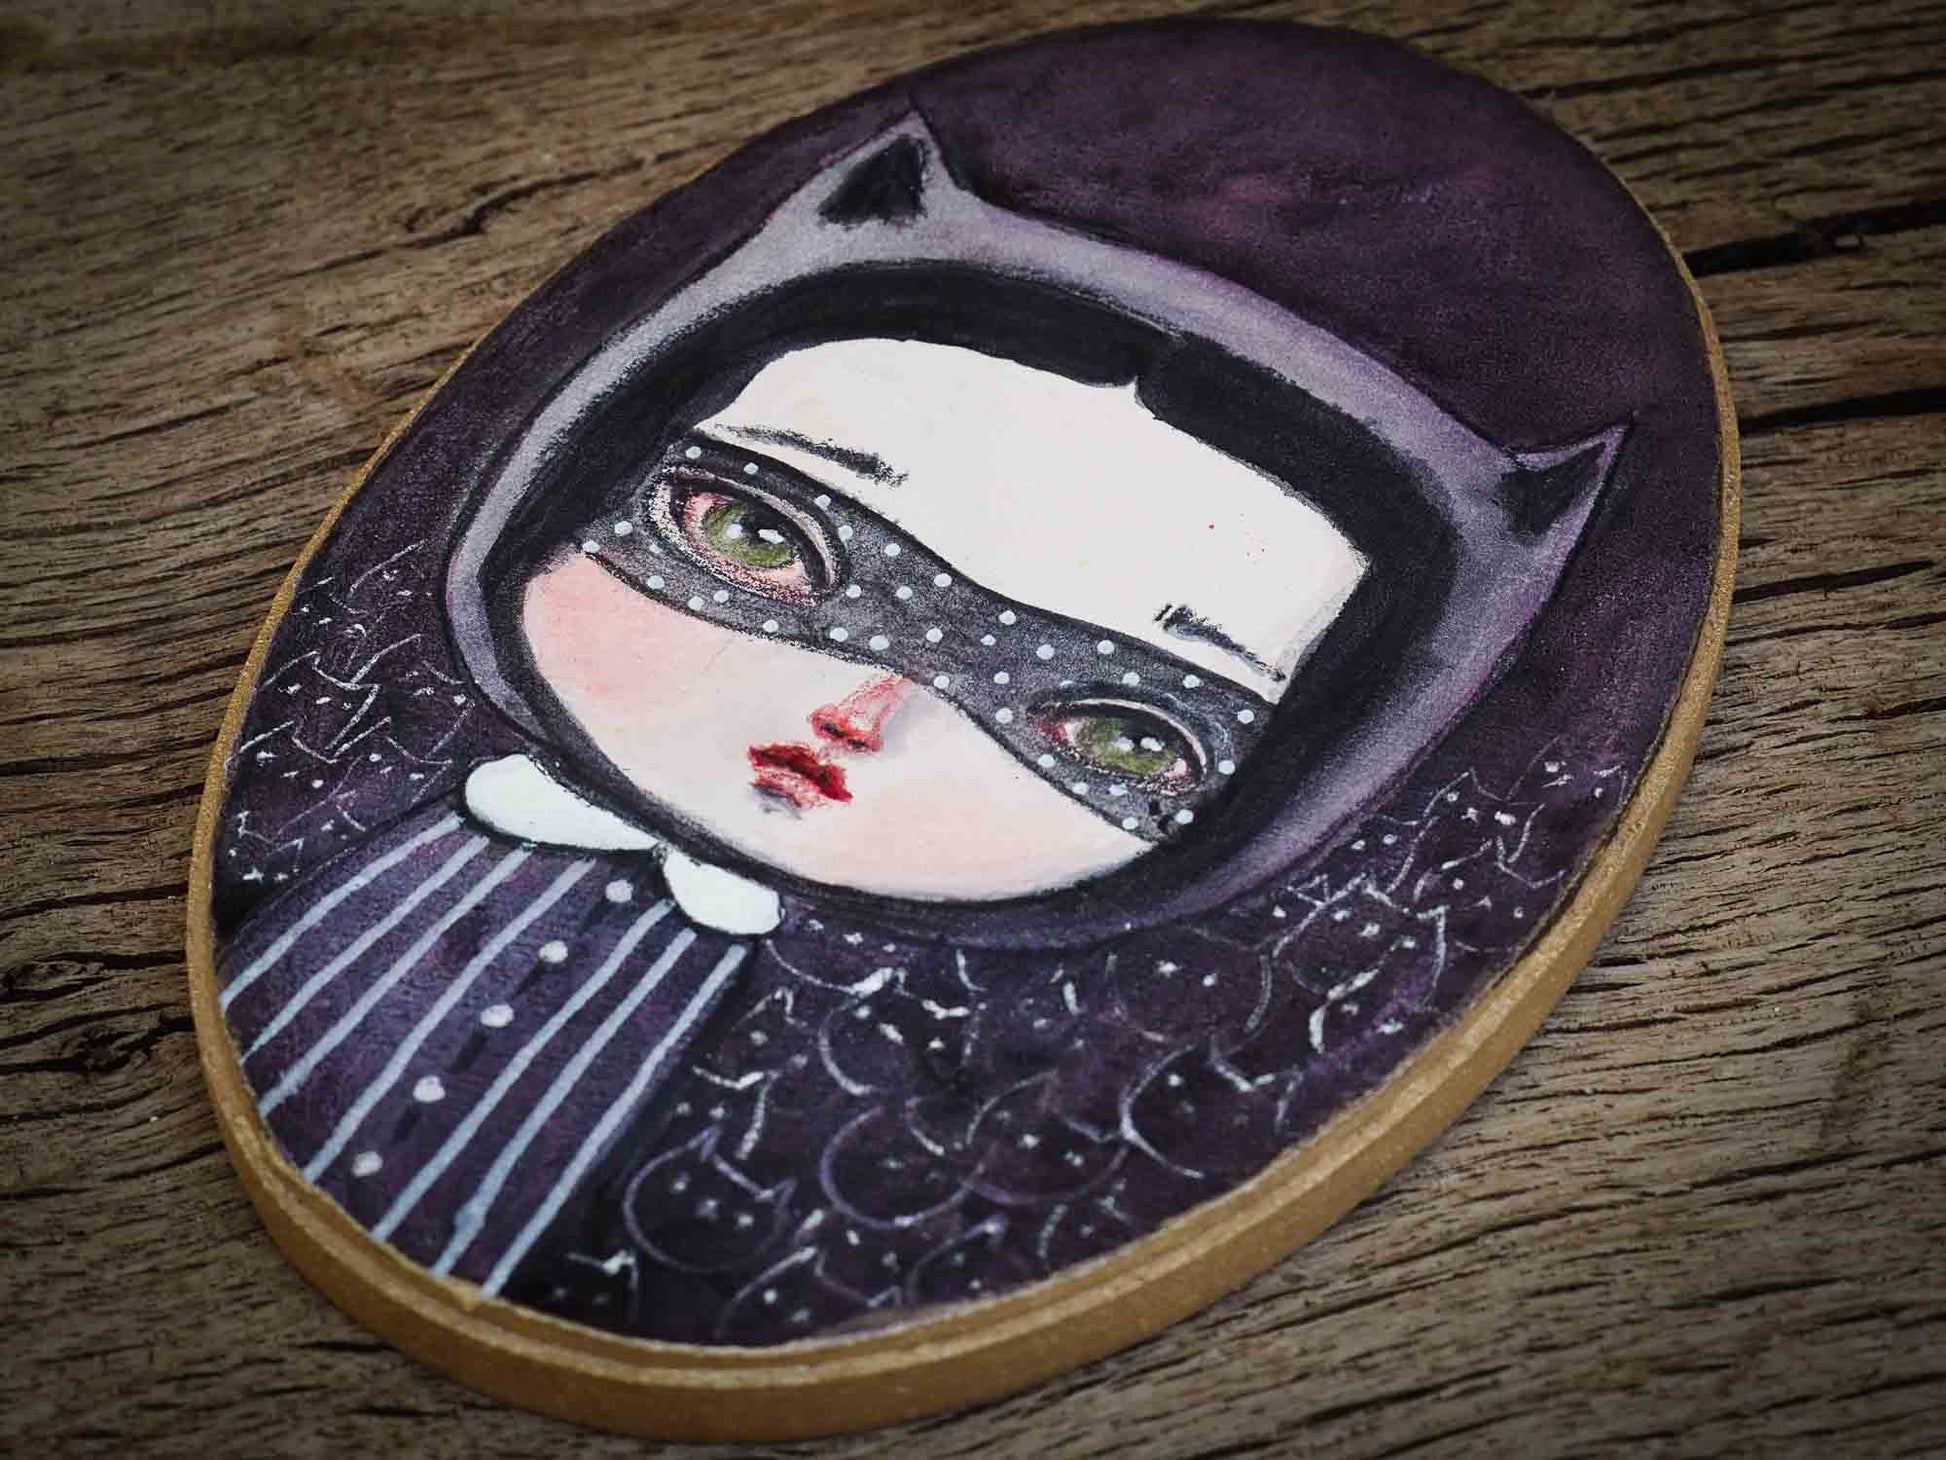 When I think of Cat Lady, I imagine a powerful woman with an army of cats at her disposal, so I painted this little girl in an oval wood canvas. I used watercolors to create an army of black cats with a mysterious ambiance where the cats are lookin right back at you, lurking in the shadows waiting to do her bidding.